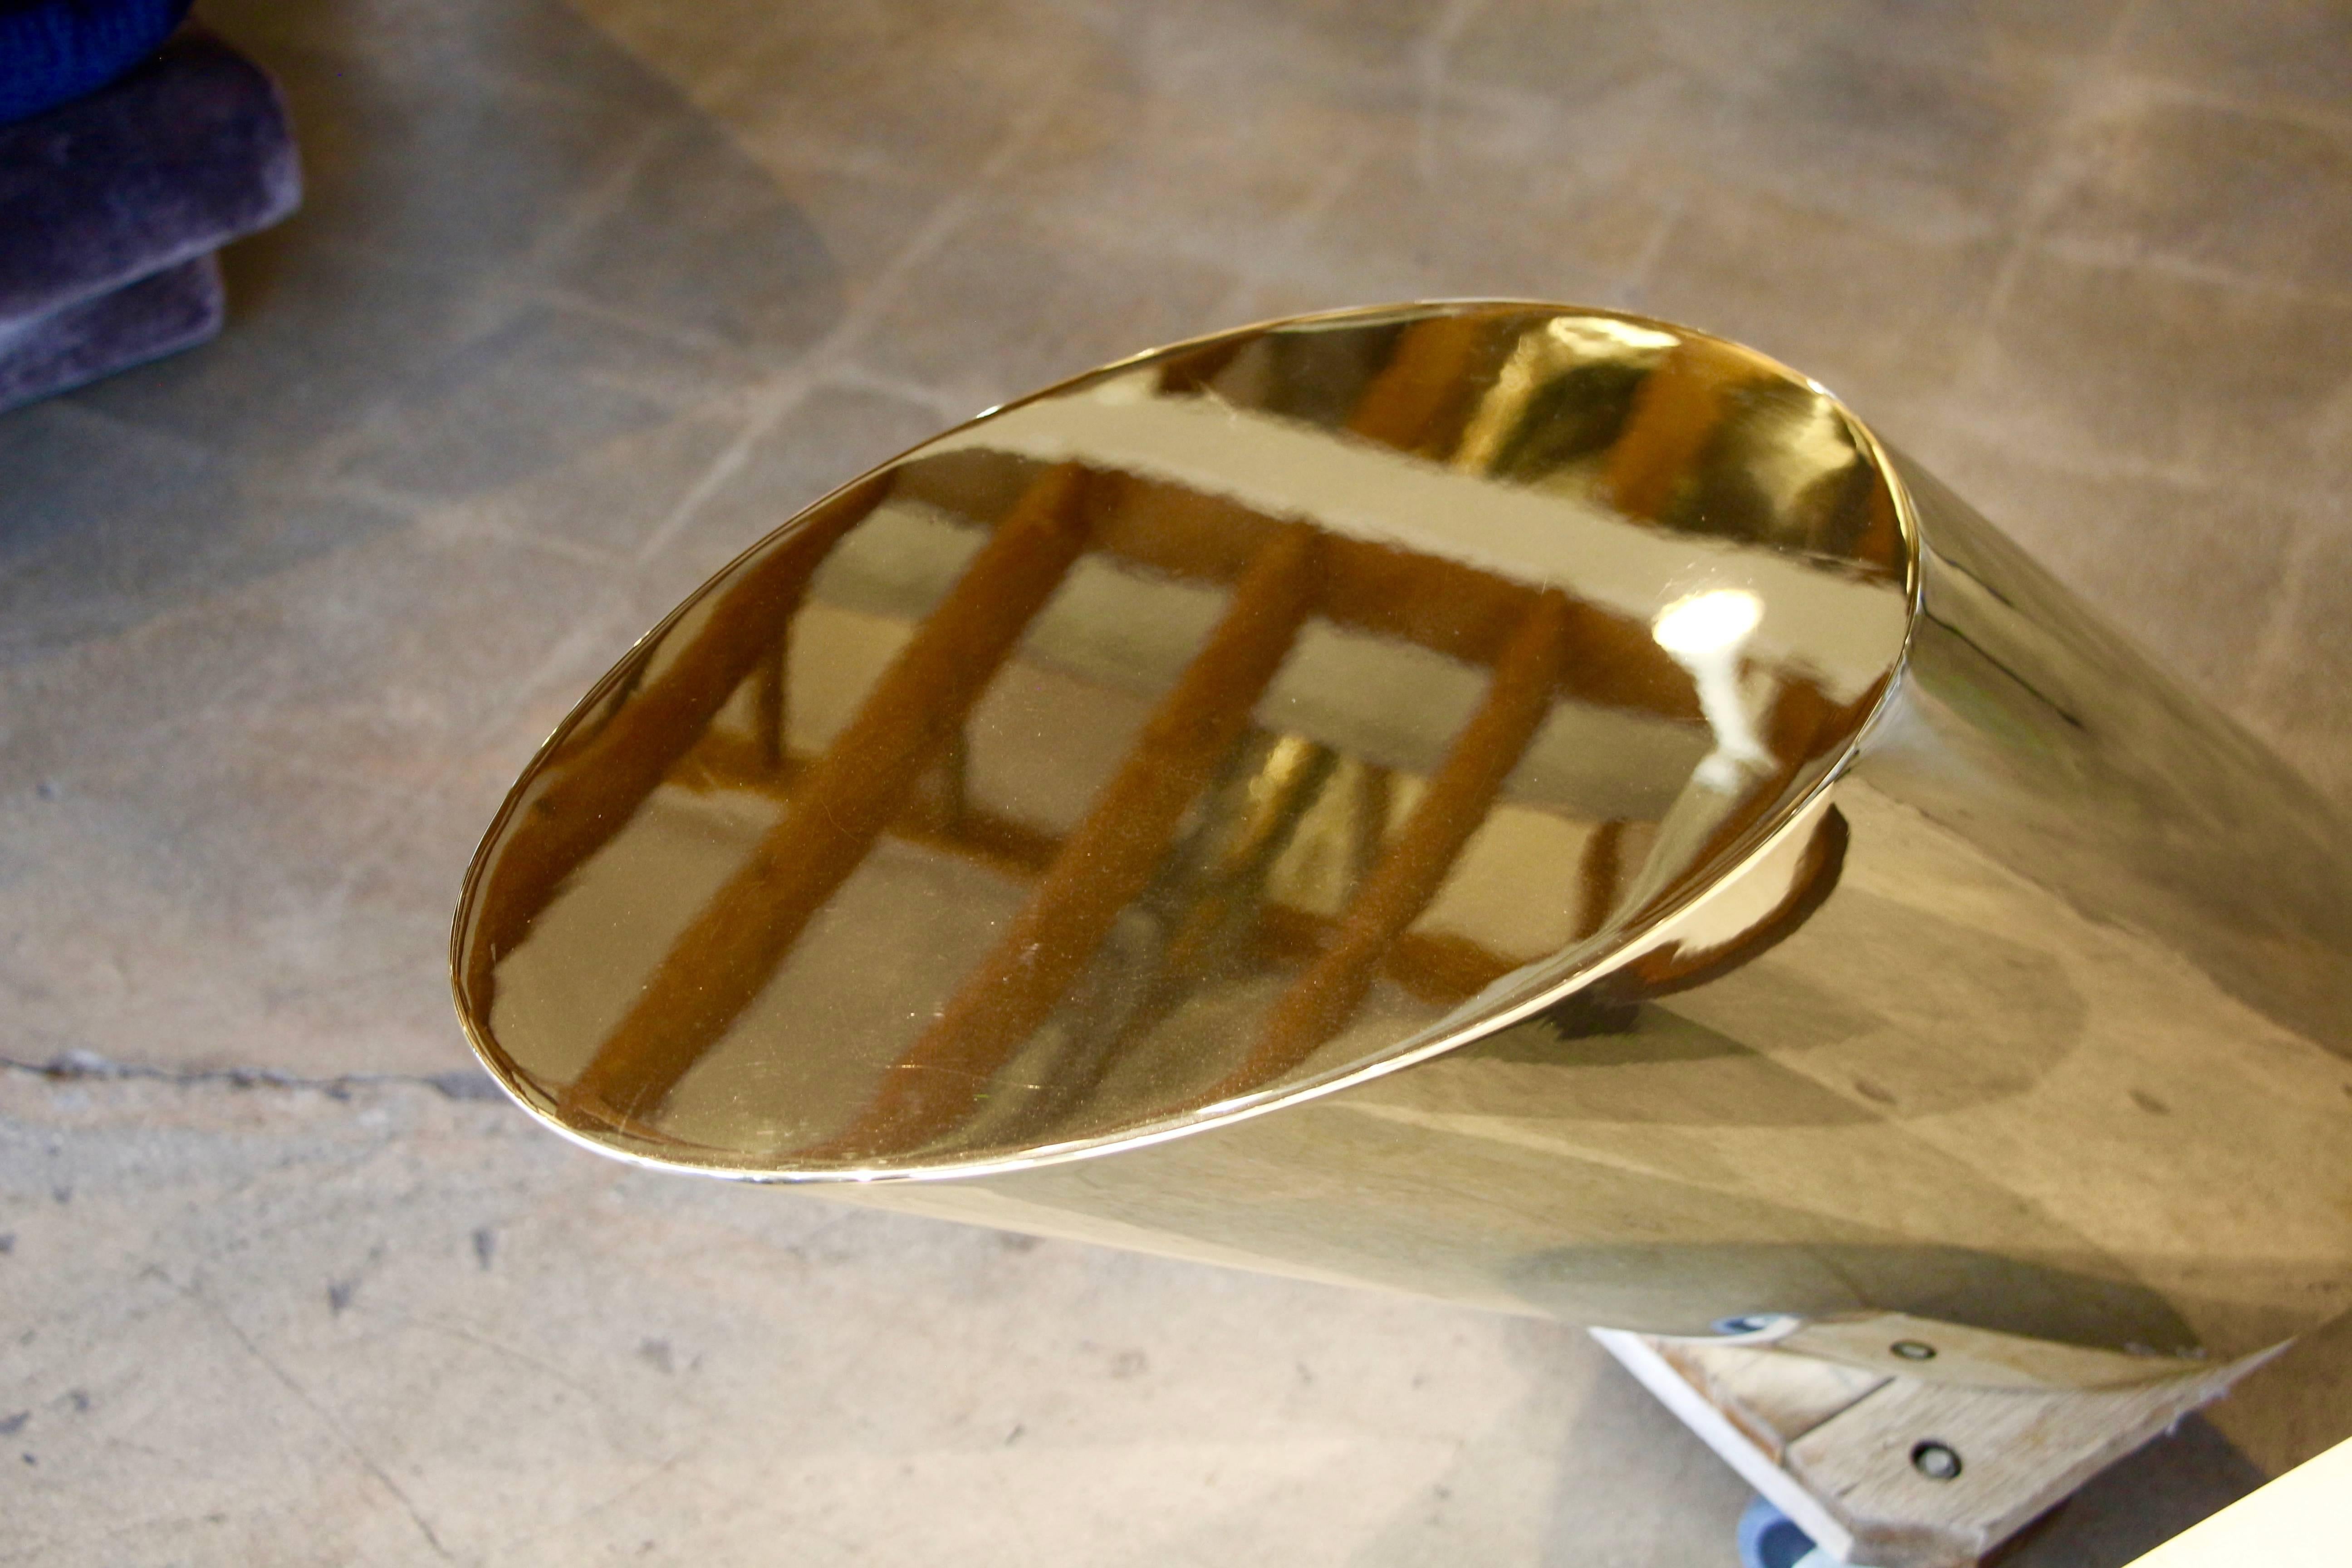 A nice vintage Zephyr table by Brueton from the 1970s in solid brass. This table has not been made in solid brass for quite a while, as they now make it in stainless and a coated brass finish. We have had it polished but it still has one small